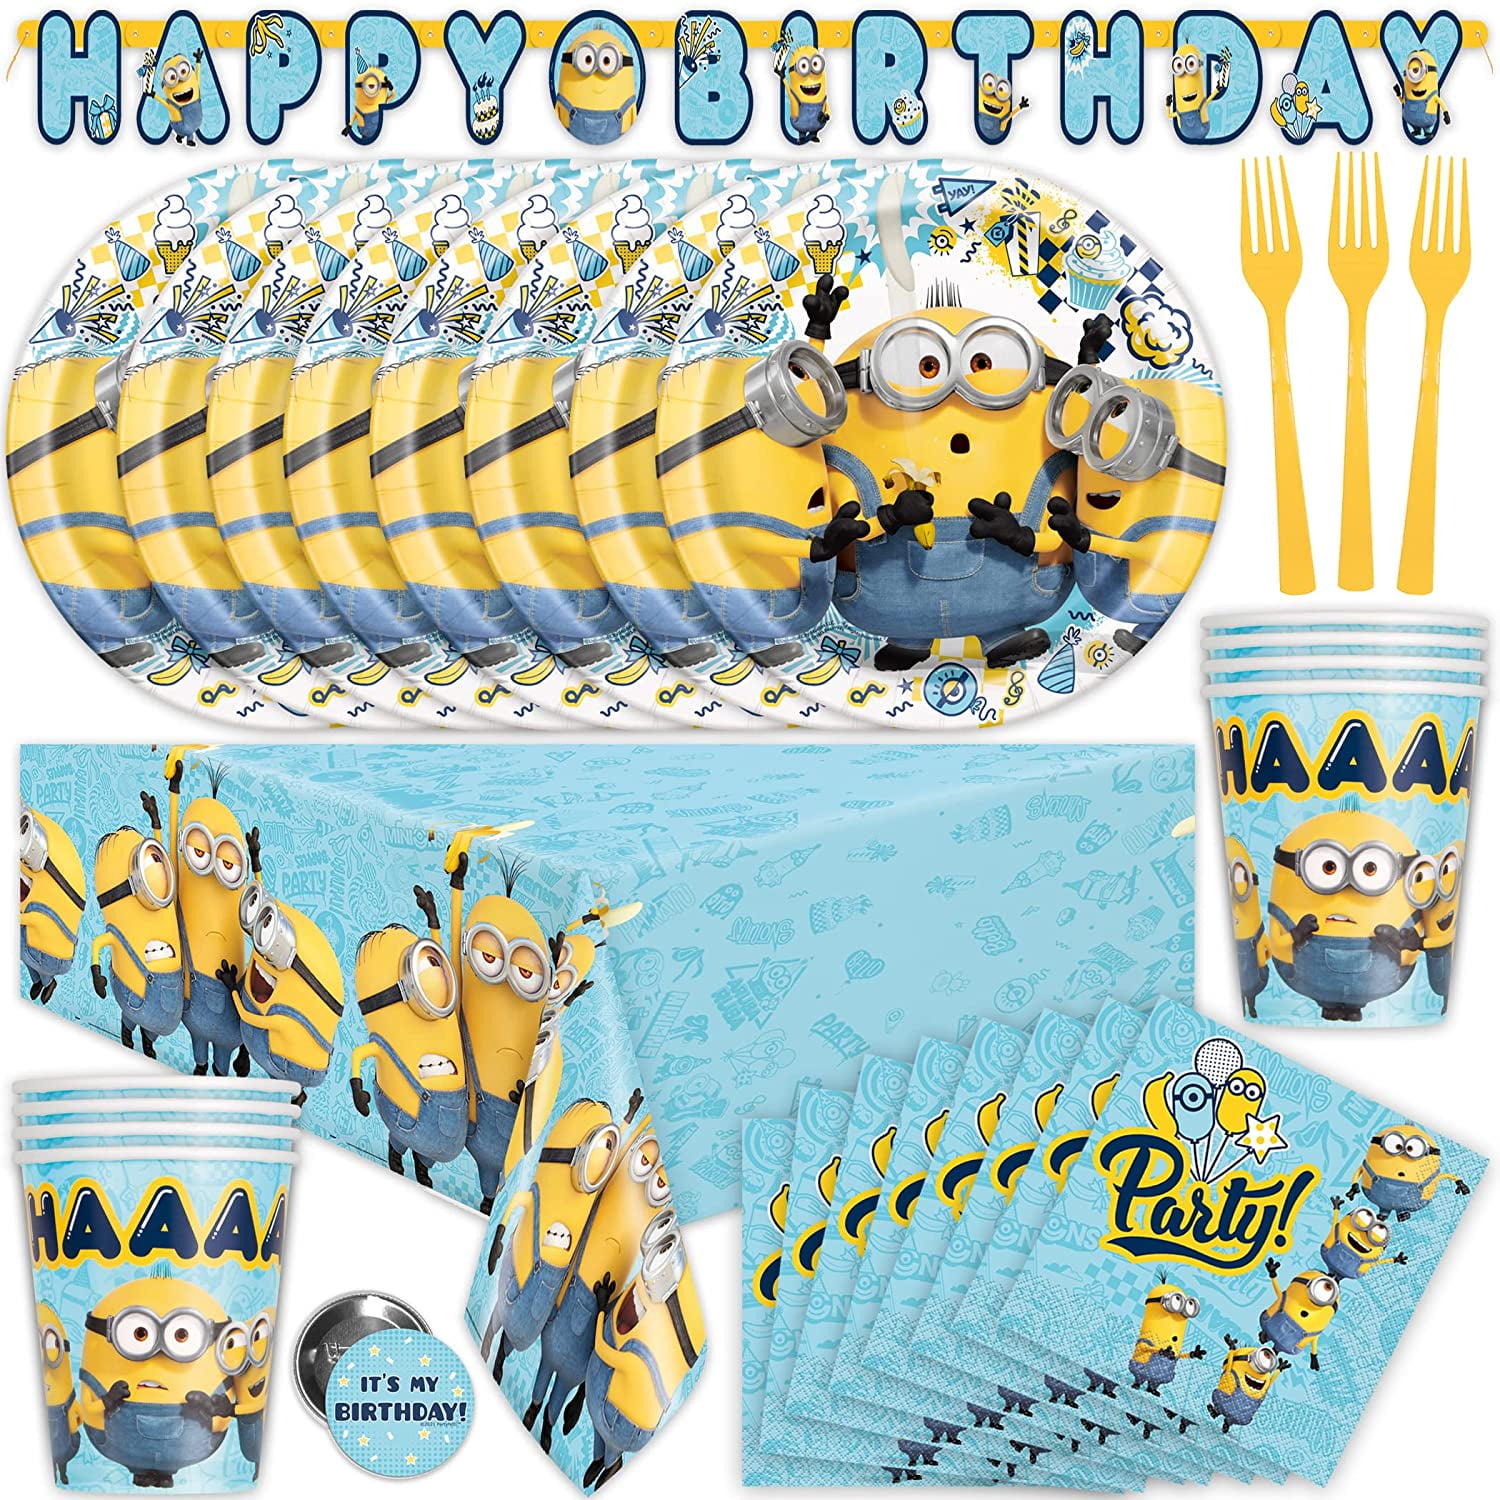 Minions Despicable Me 2 Birthday Party Supplies Set Range Napkin Plate Cup 